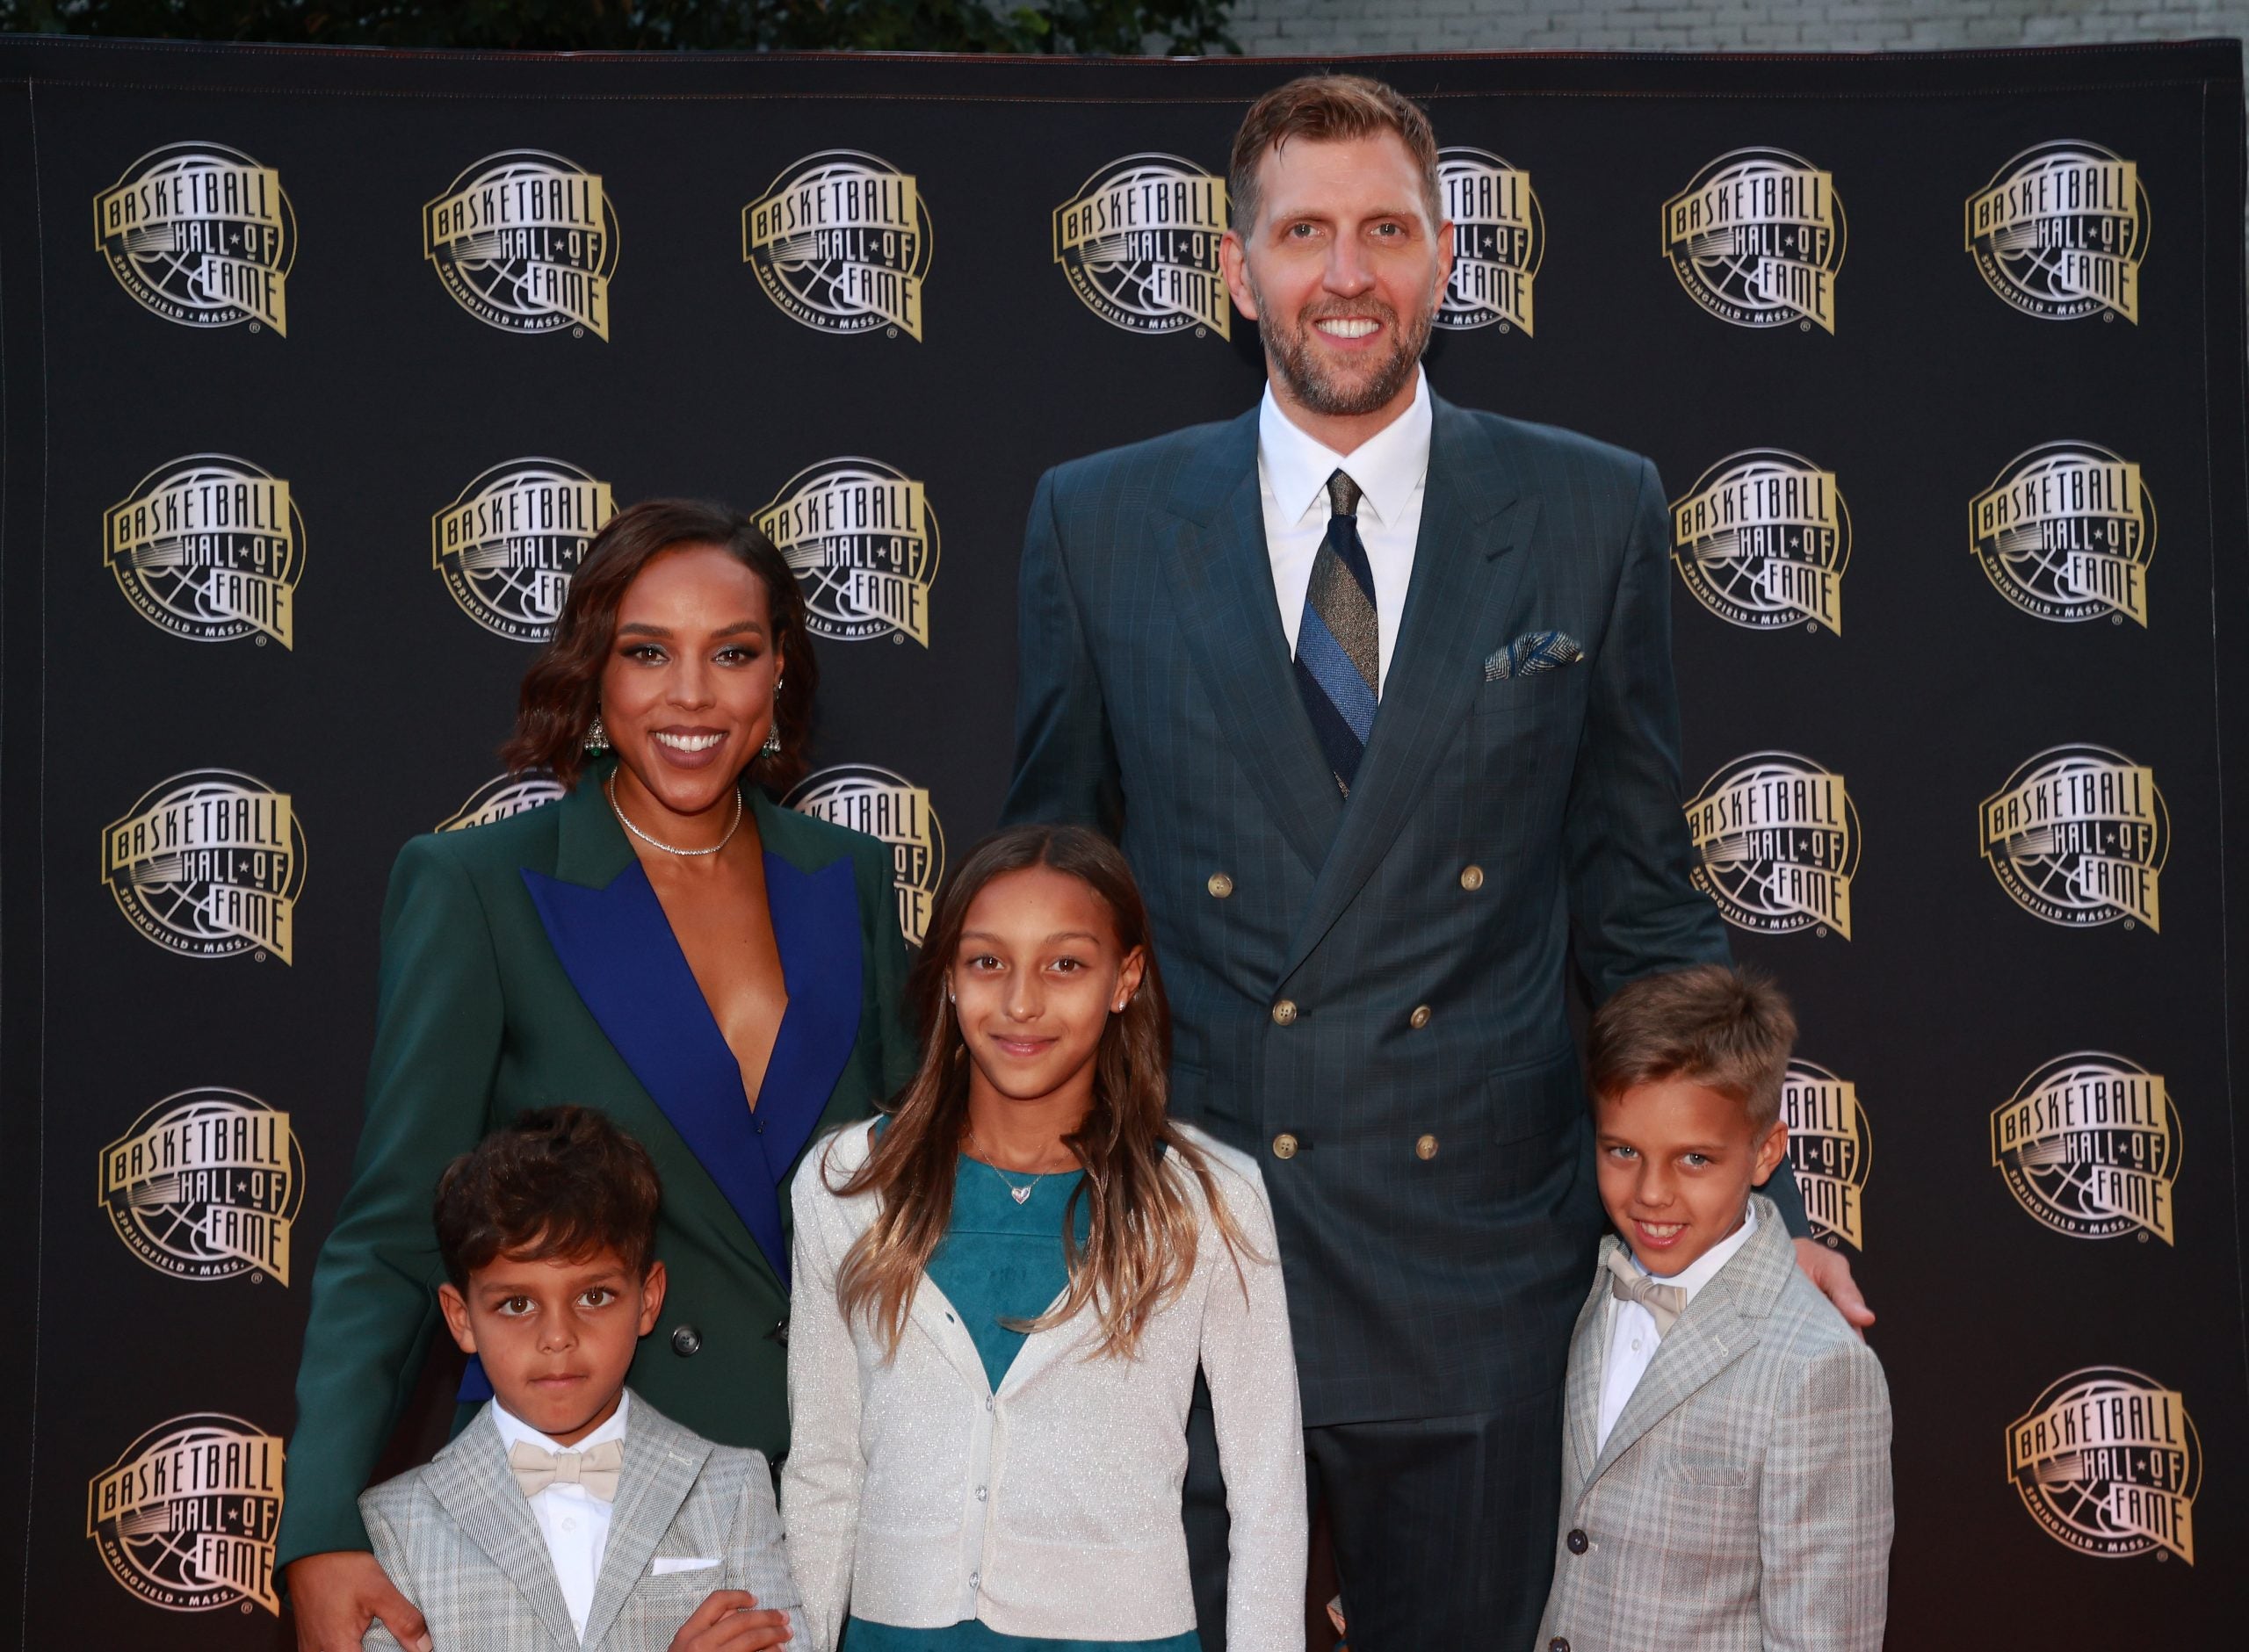 Dwyane Wade's Family at Basketball Hall of Fame Induction